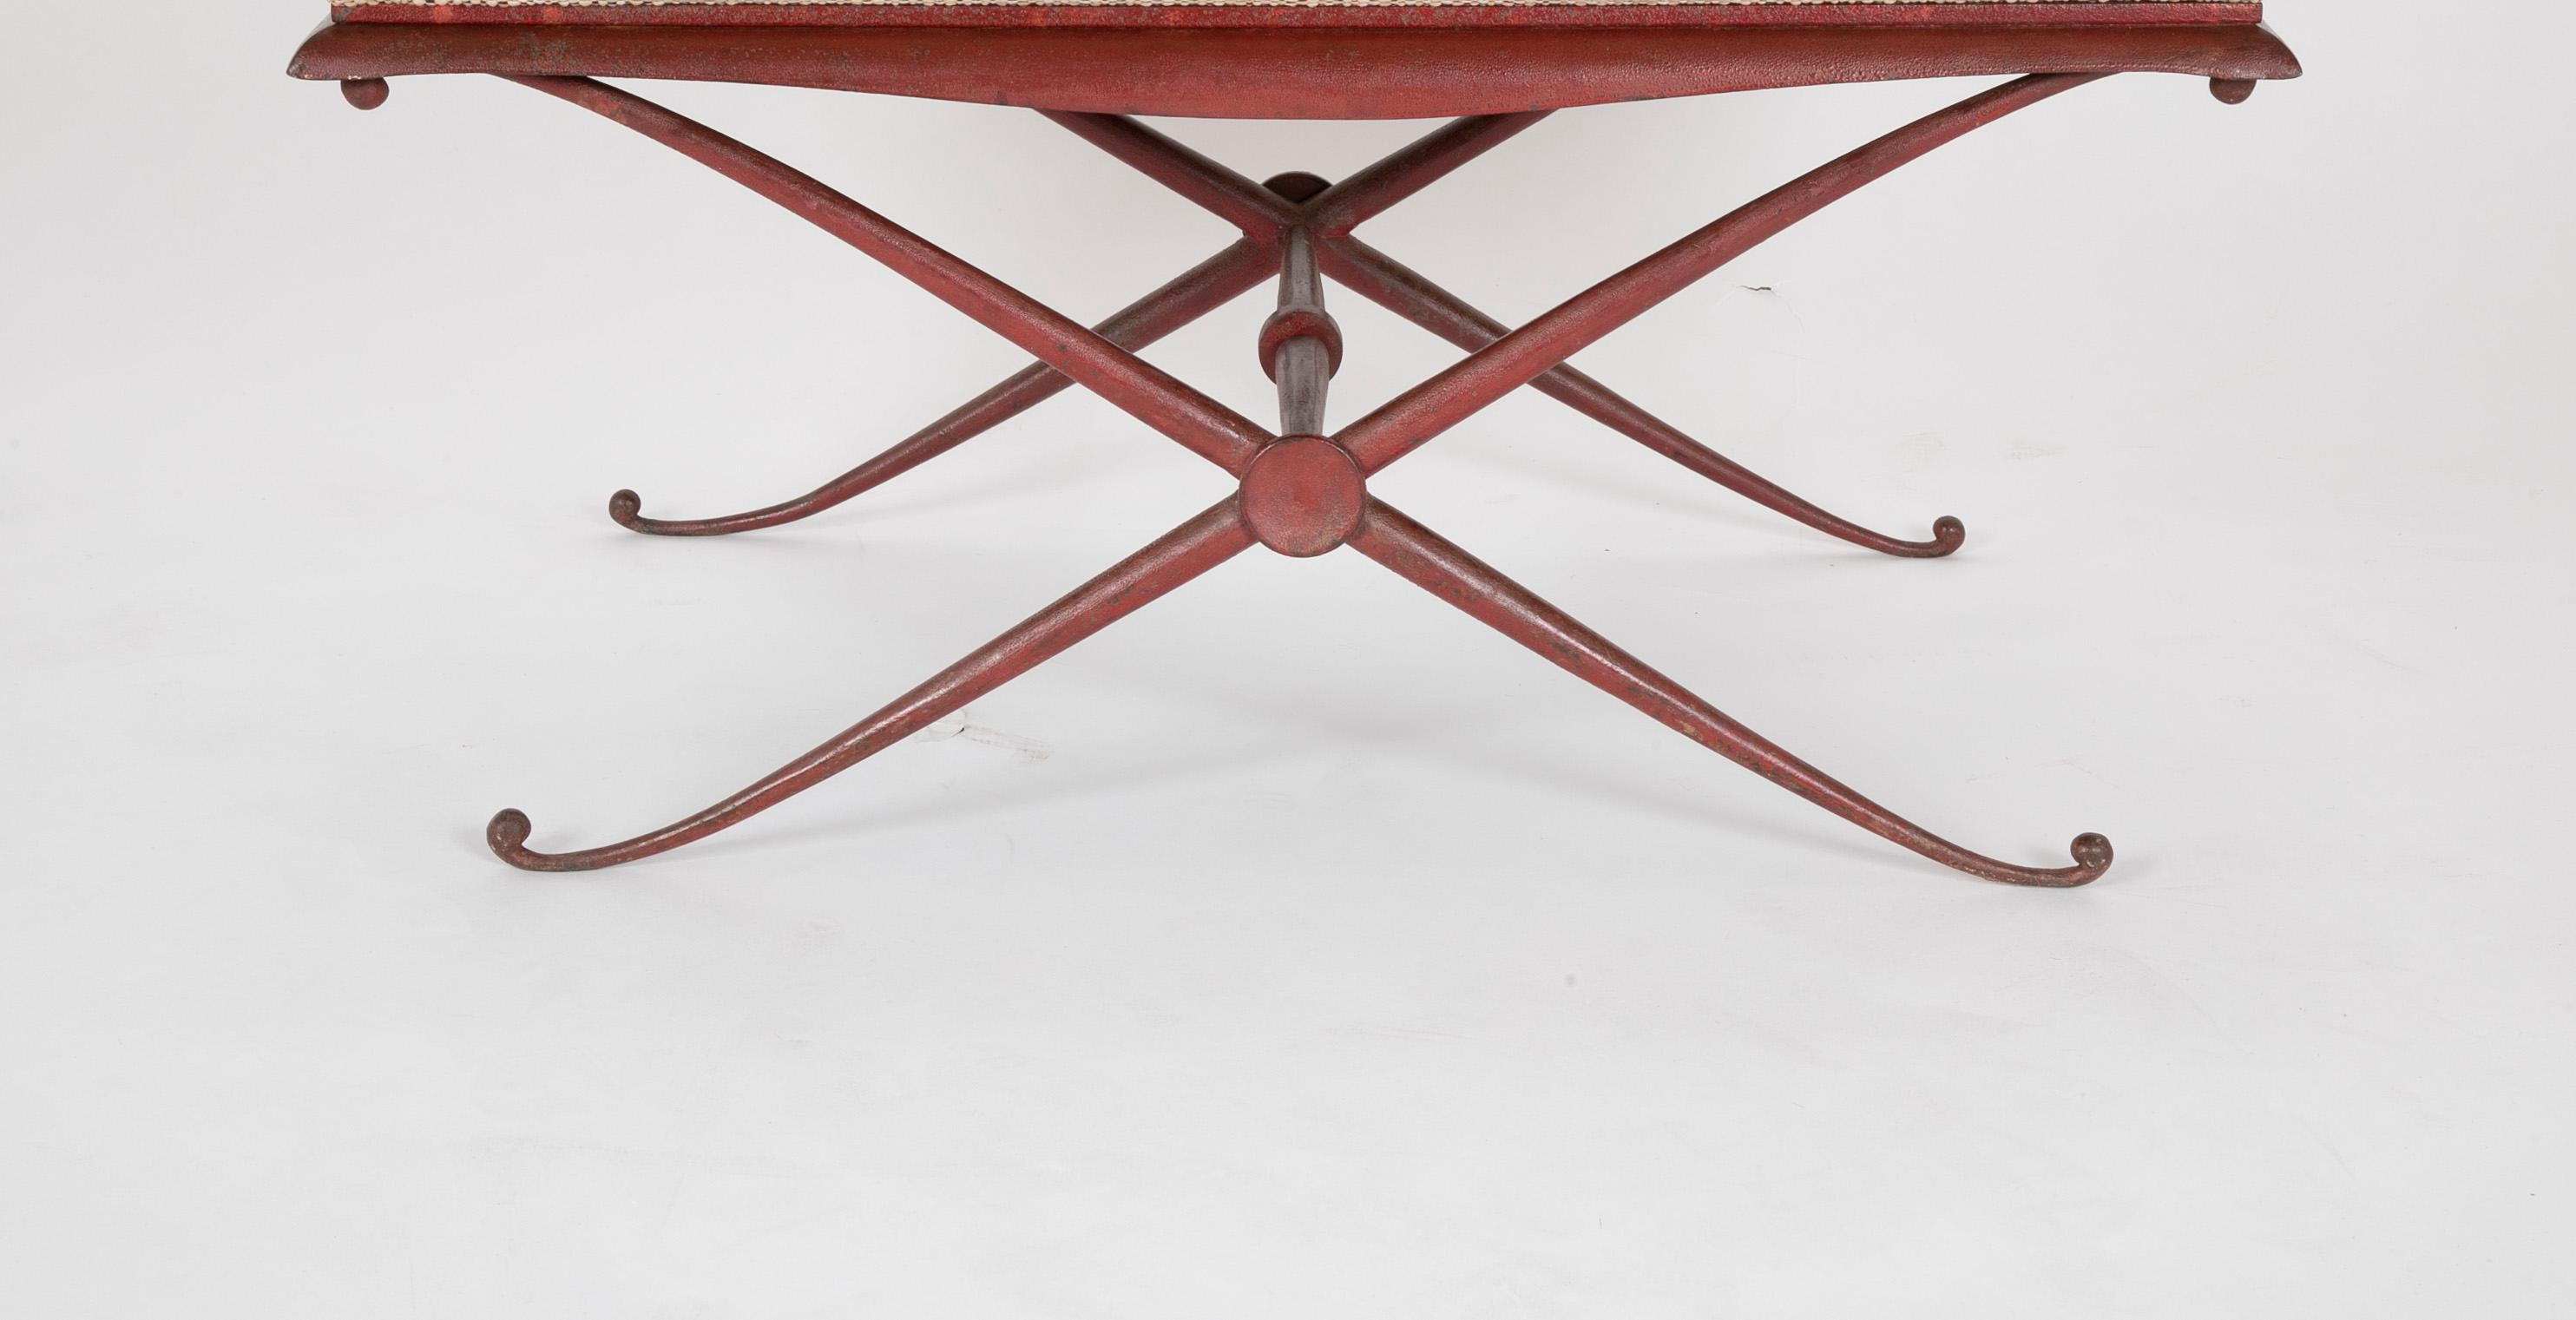 Modern Polychrome Iron Bench in the Manner of Arbus 1